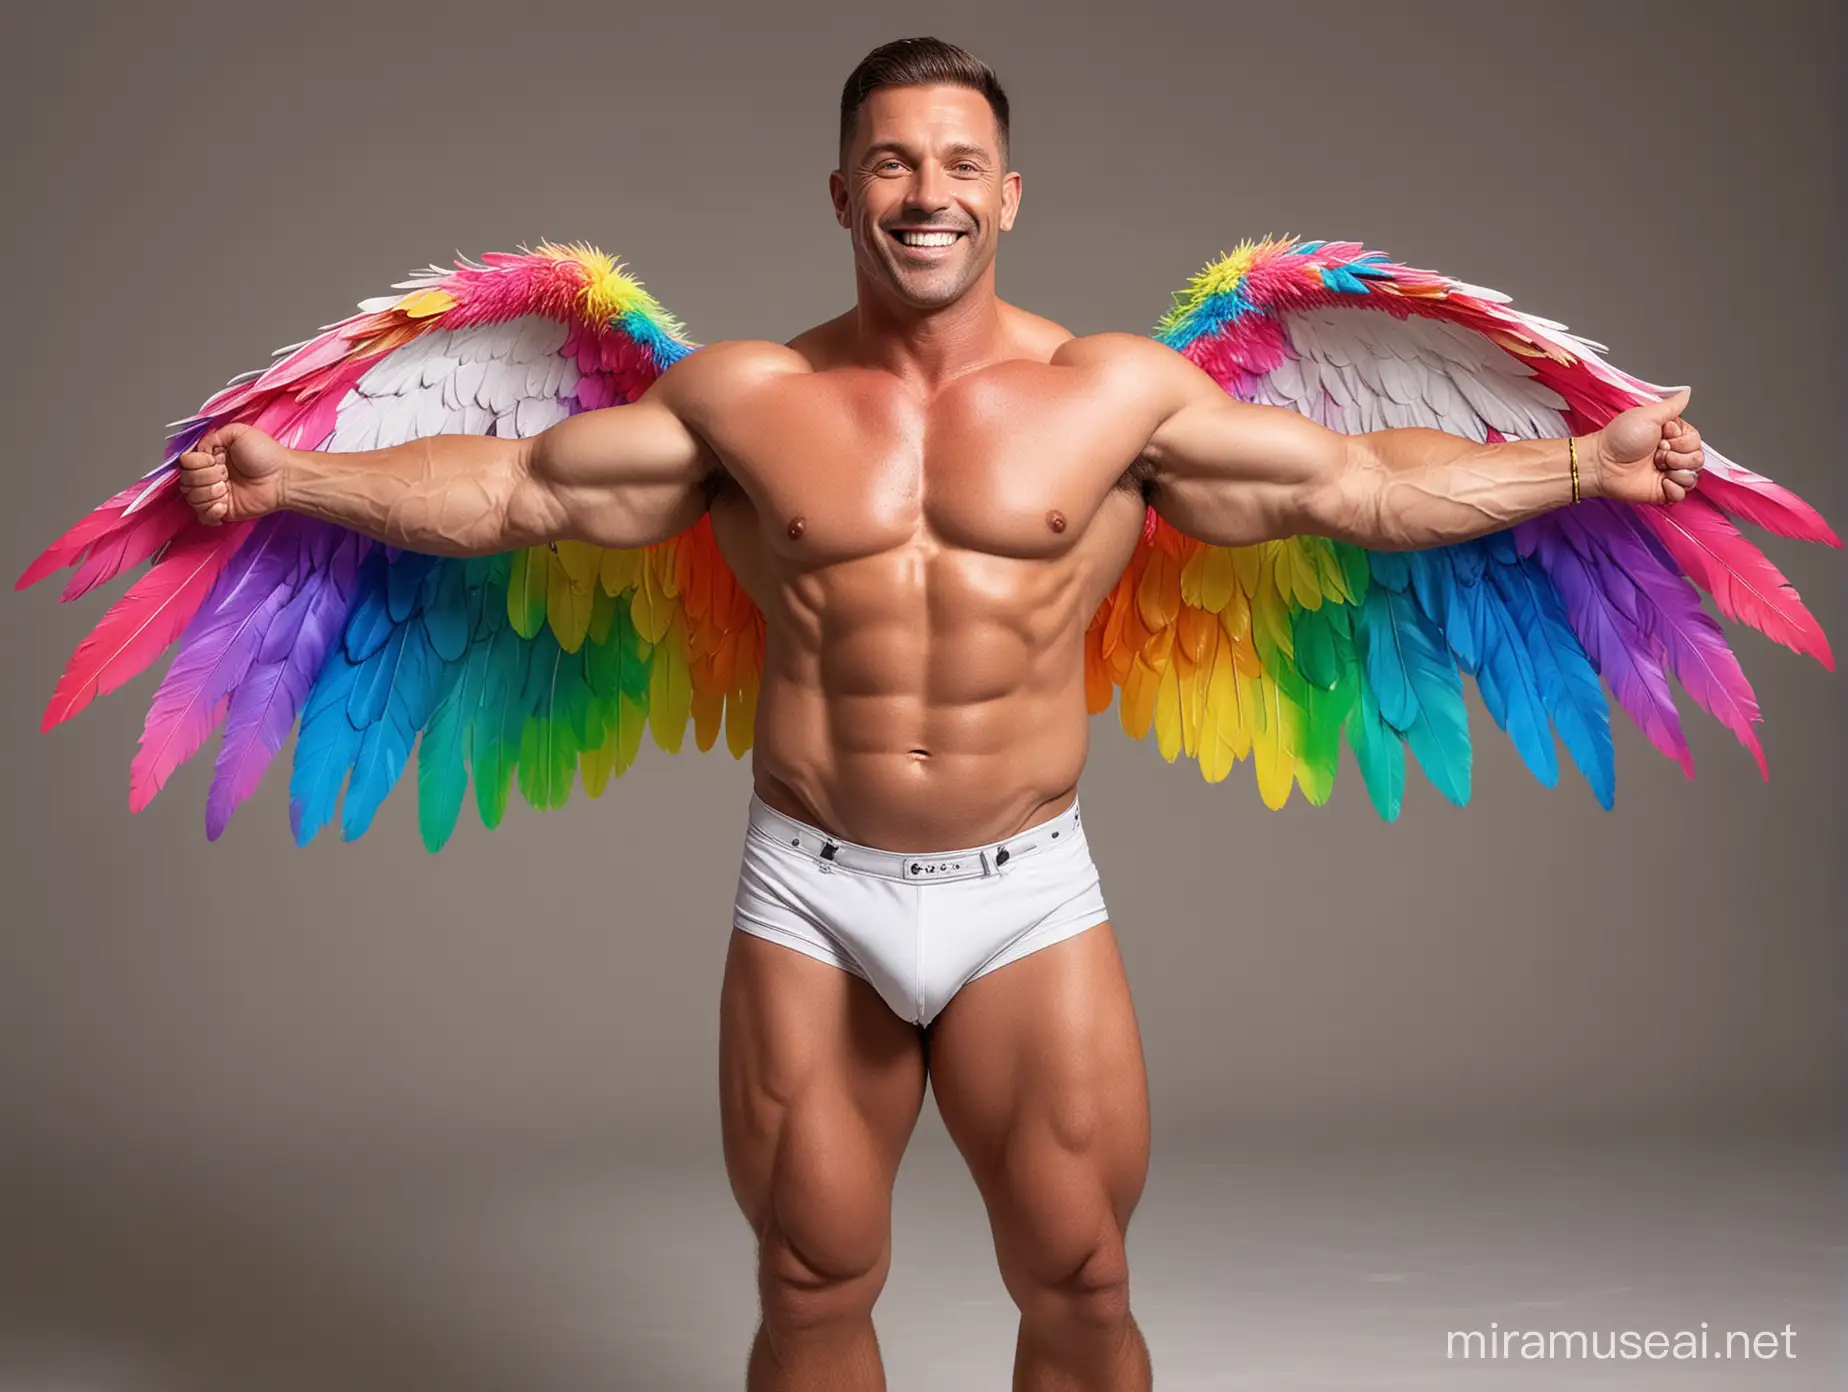 Smiling Topless 40s Bodybuilder Daddy Flexing in Rainbow Eagle Wings Jacket